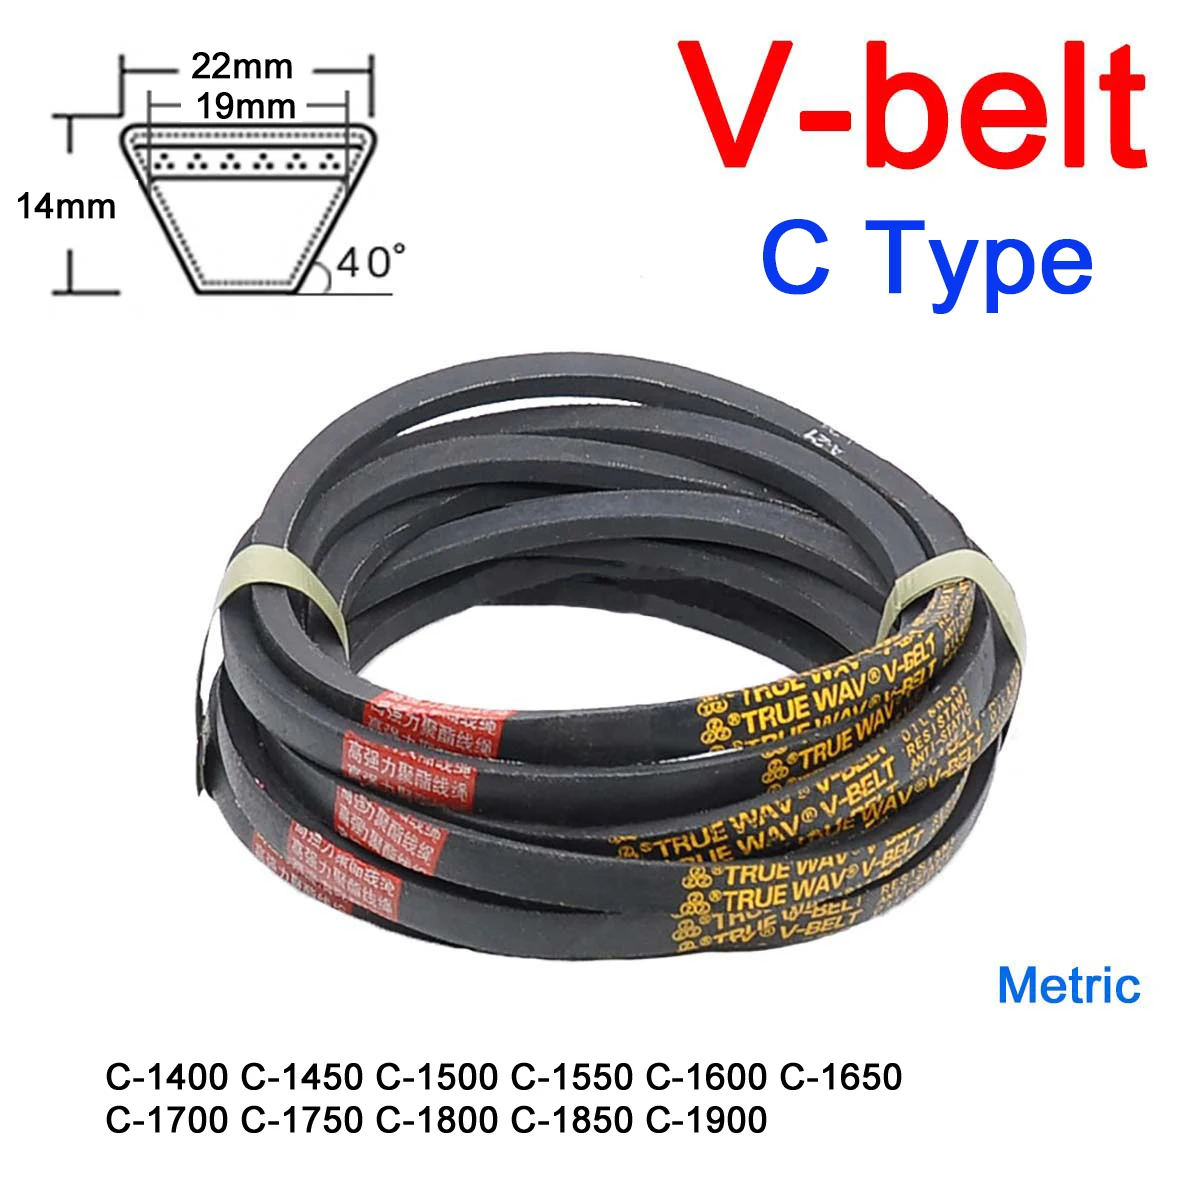 

1Pc C Type V-belt Pitch Length 1400 1450 1500 1550 1600 1650 1700 1750 1800 1850 1900mm for Automotive, Agricultural Equipment